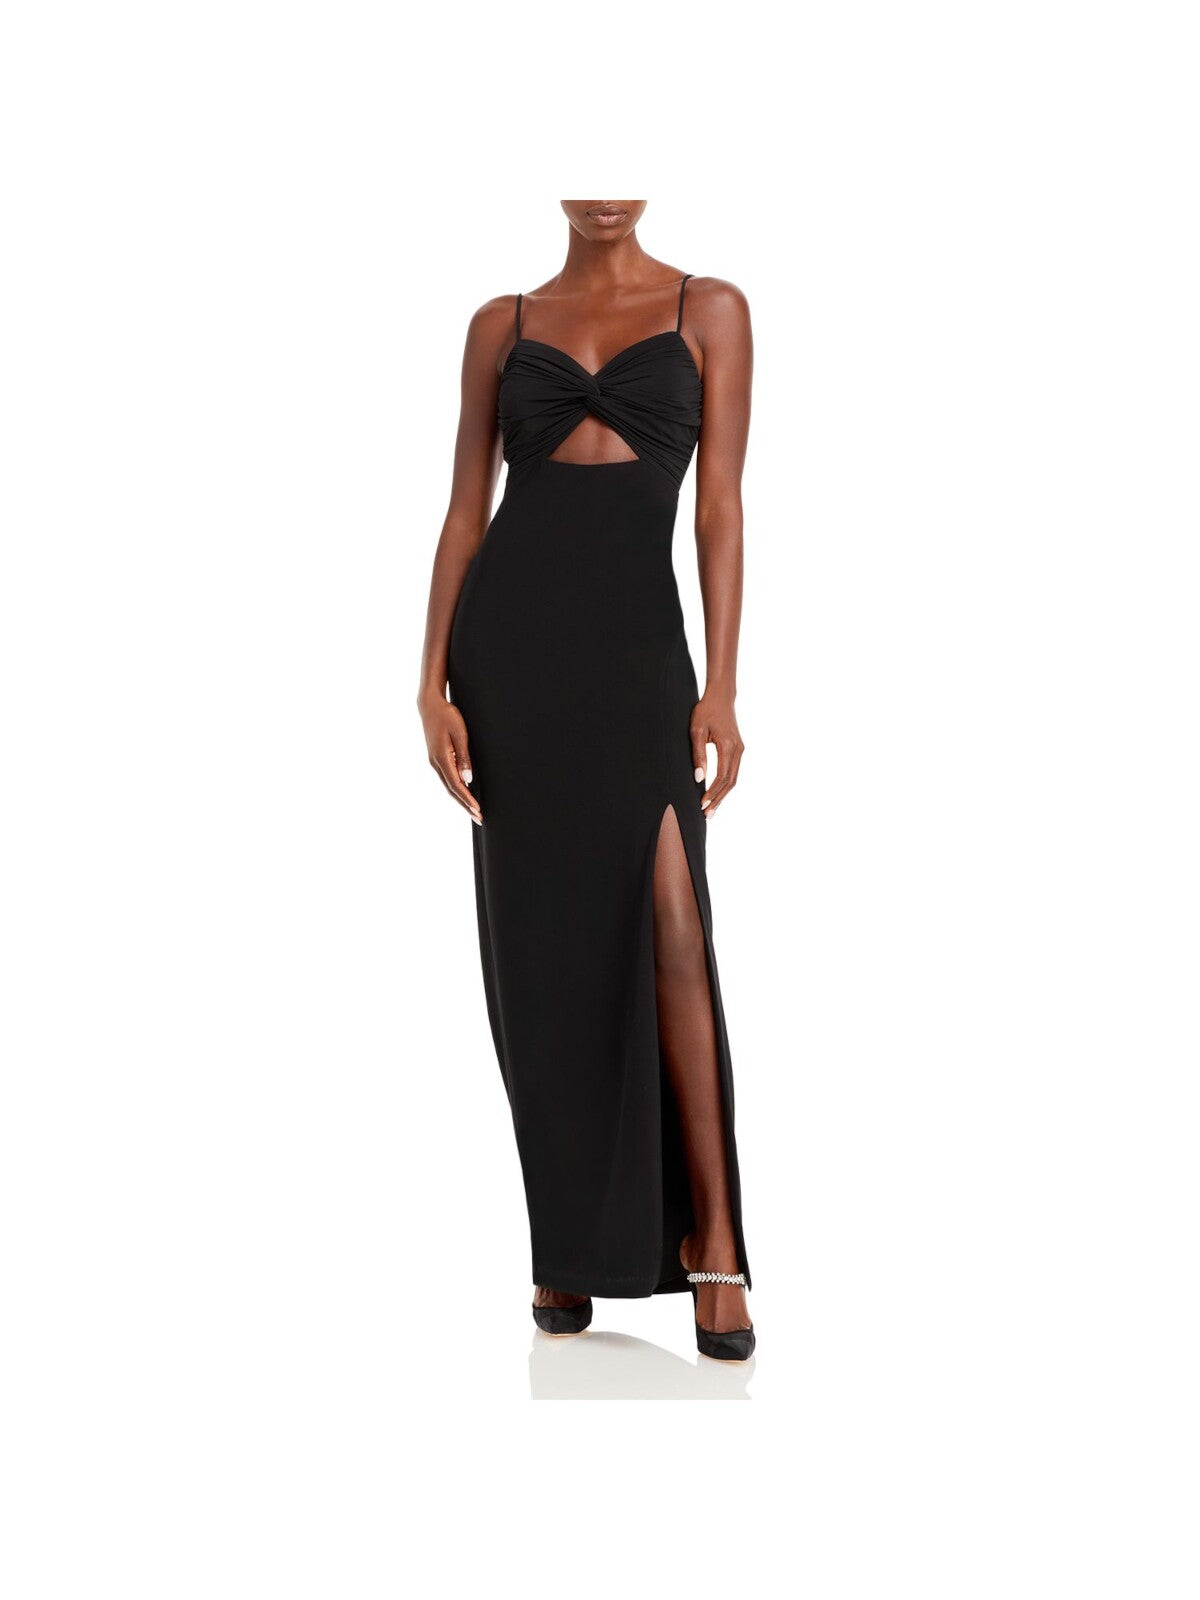 AQUA FORMAL Womens Black Stretch Zippered Twist Front Cutout Ruched High Slit Lined Spaghetti Strap Sweetheart Neckline Full-Length Evening Gown Dress 6